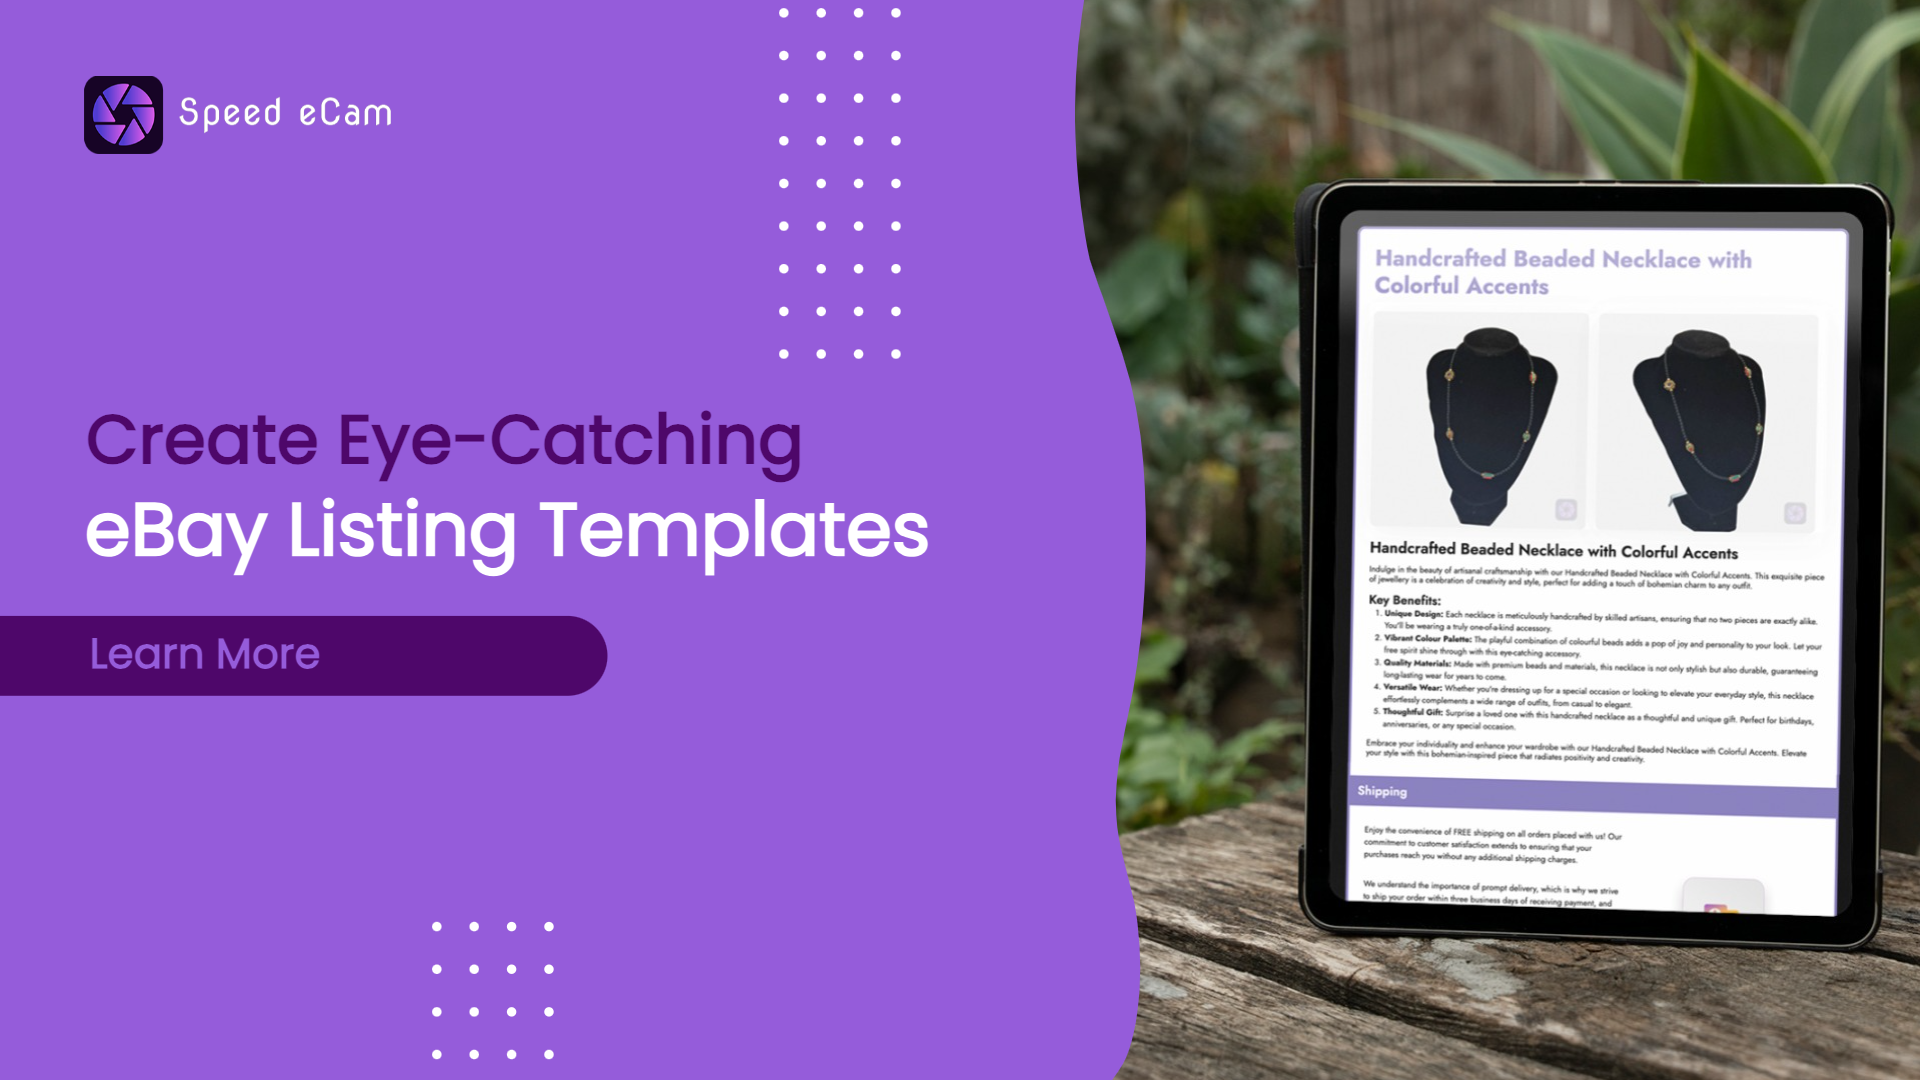 How to Create Eye-Catching eBay Listing Templates